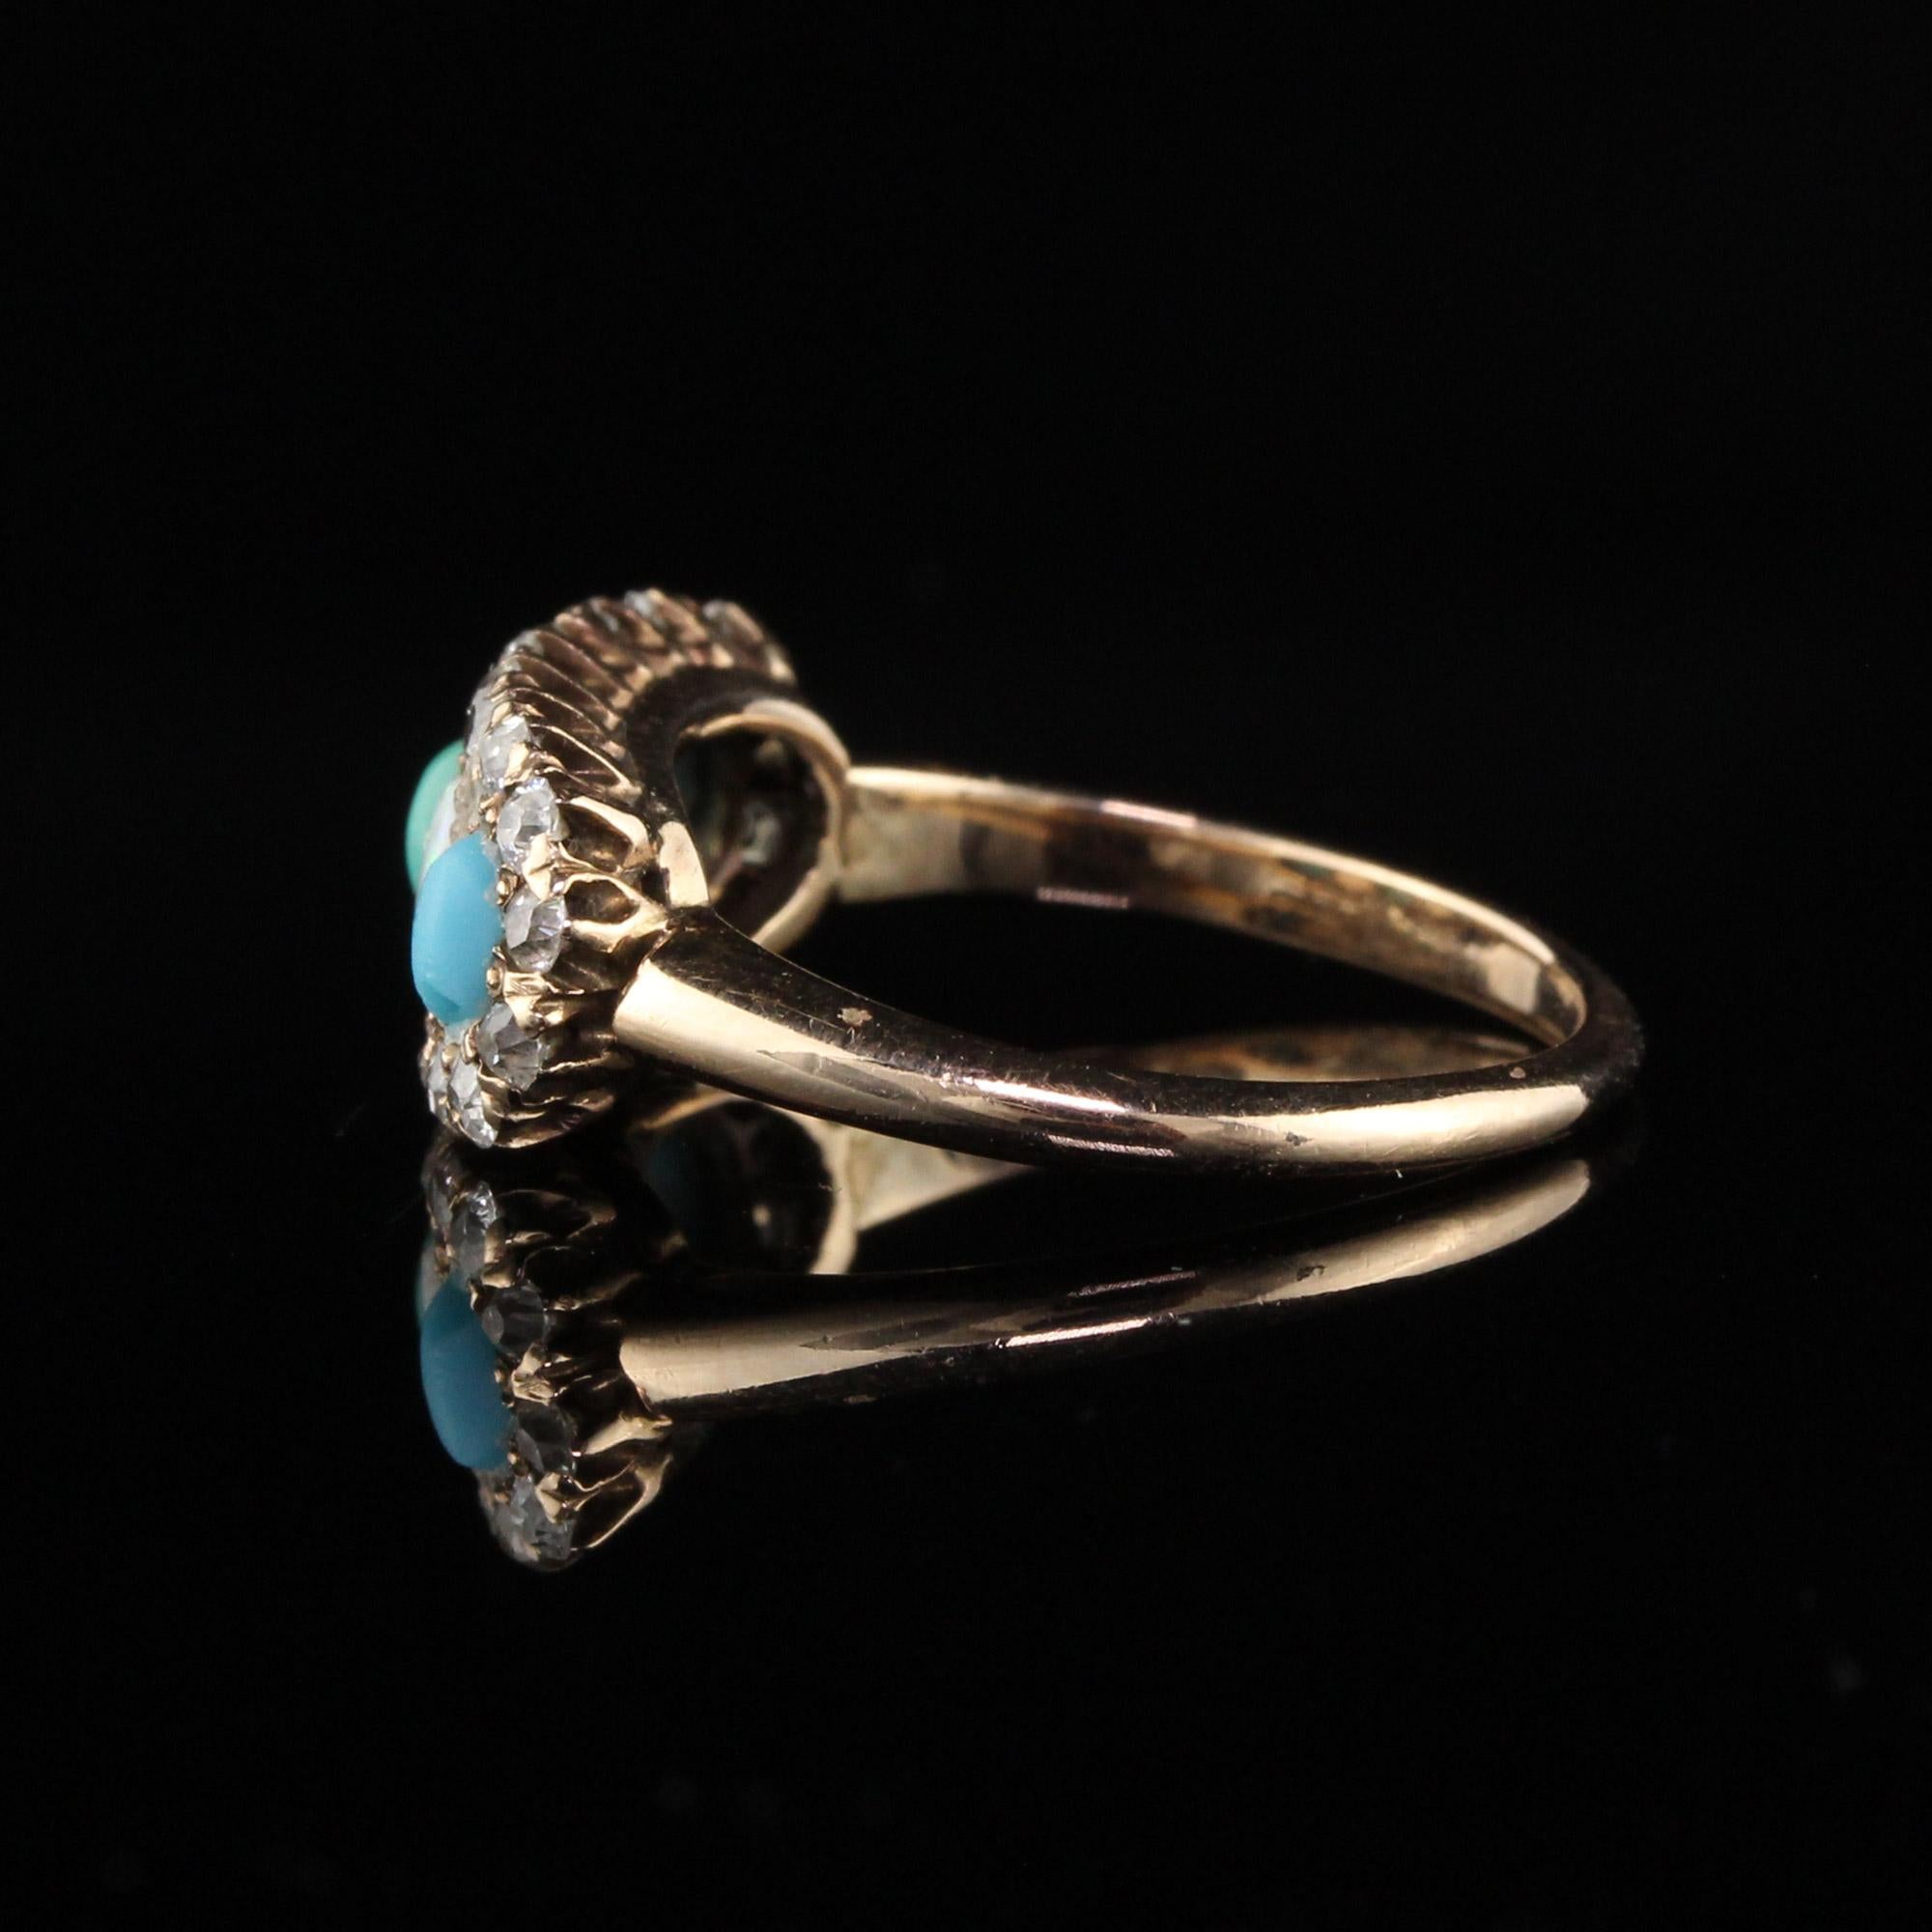 Old European Cut Antique Victorian Old Mine Cut Diamond, Opal, and Turquoise Ring